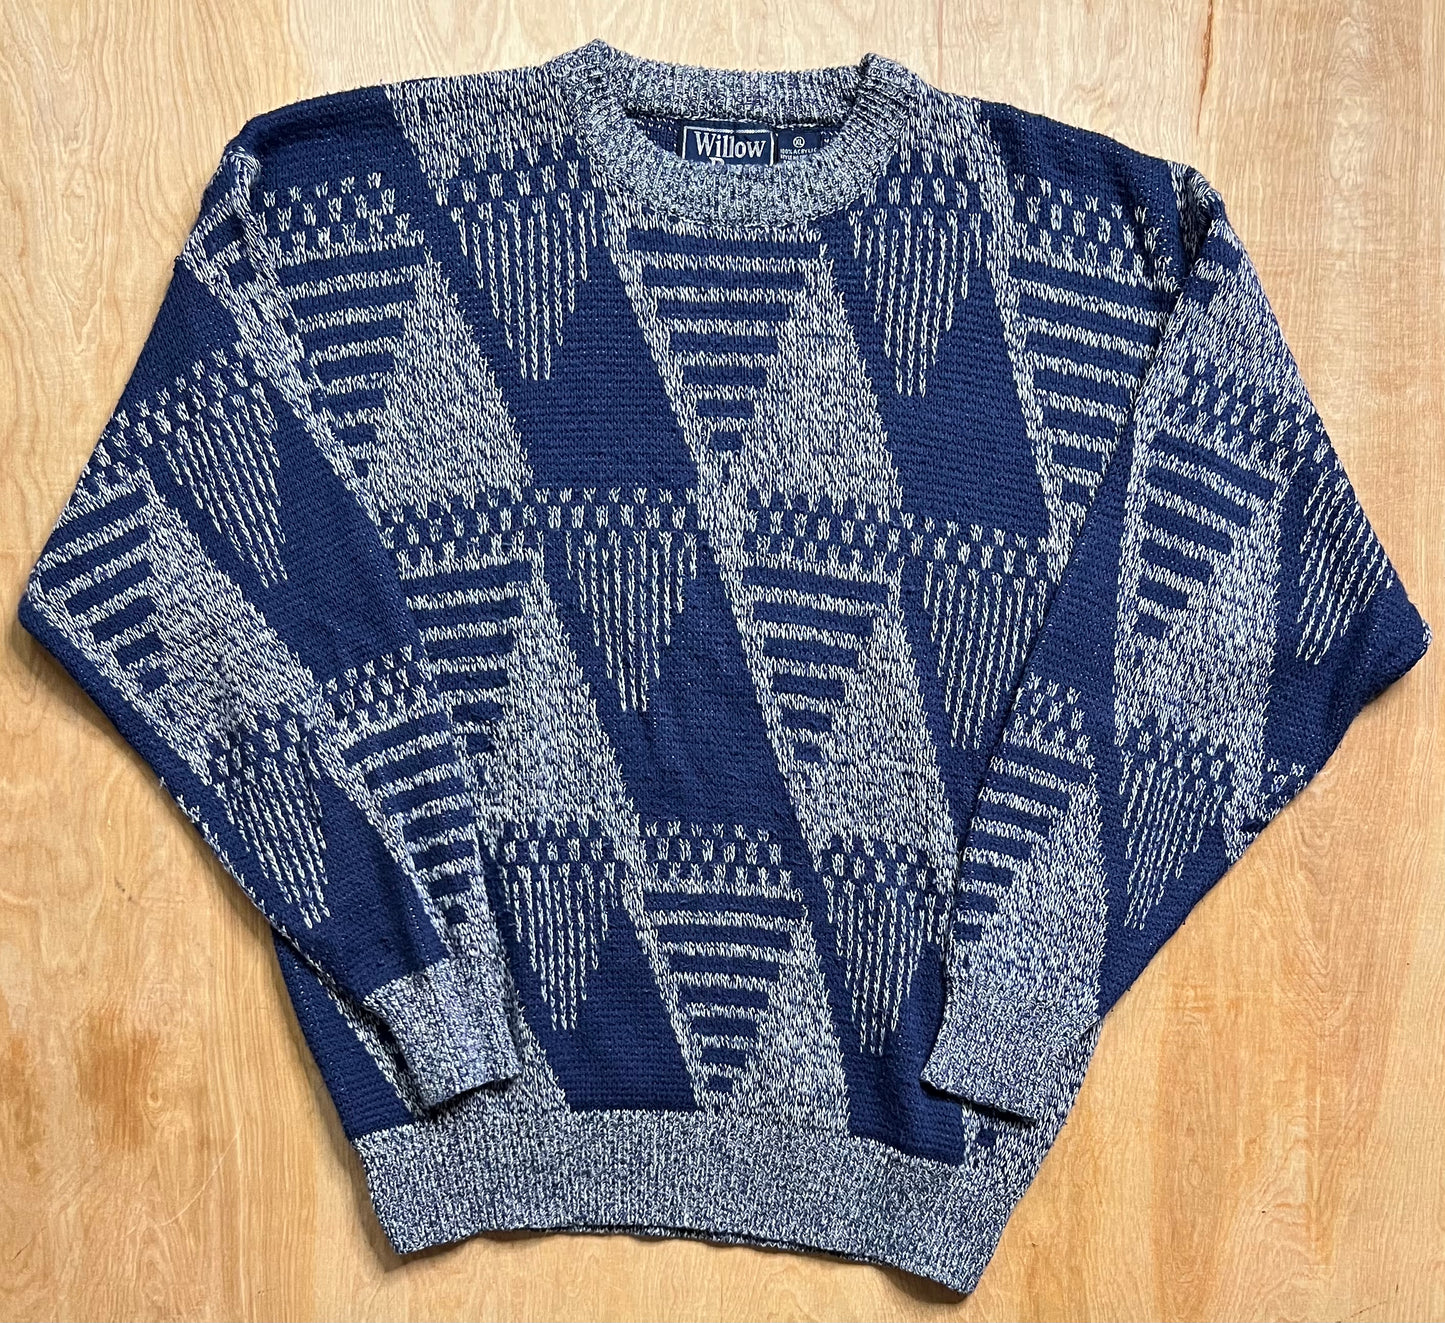 Vintage Willow Bay Sweater